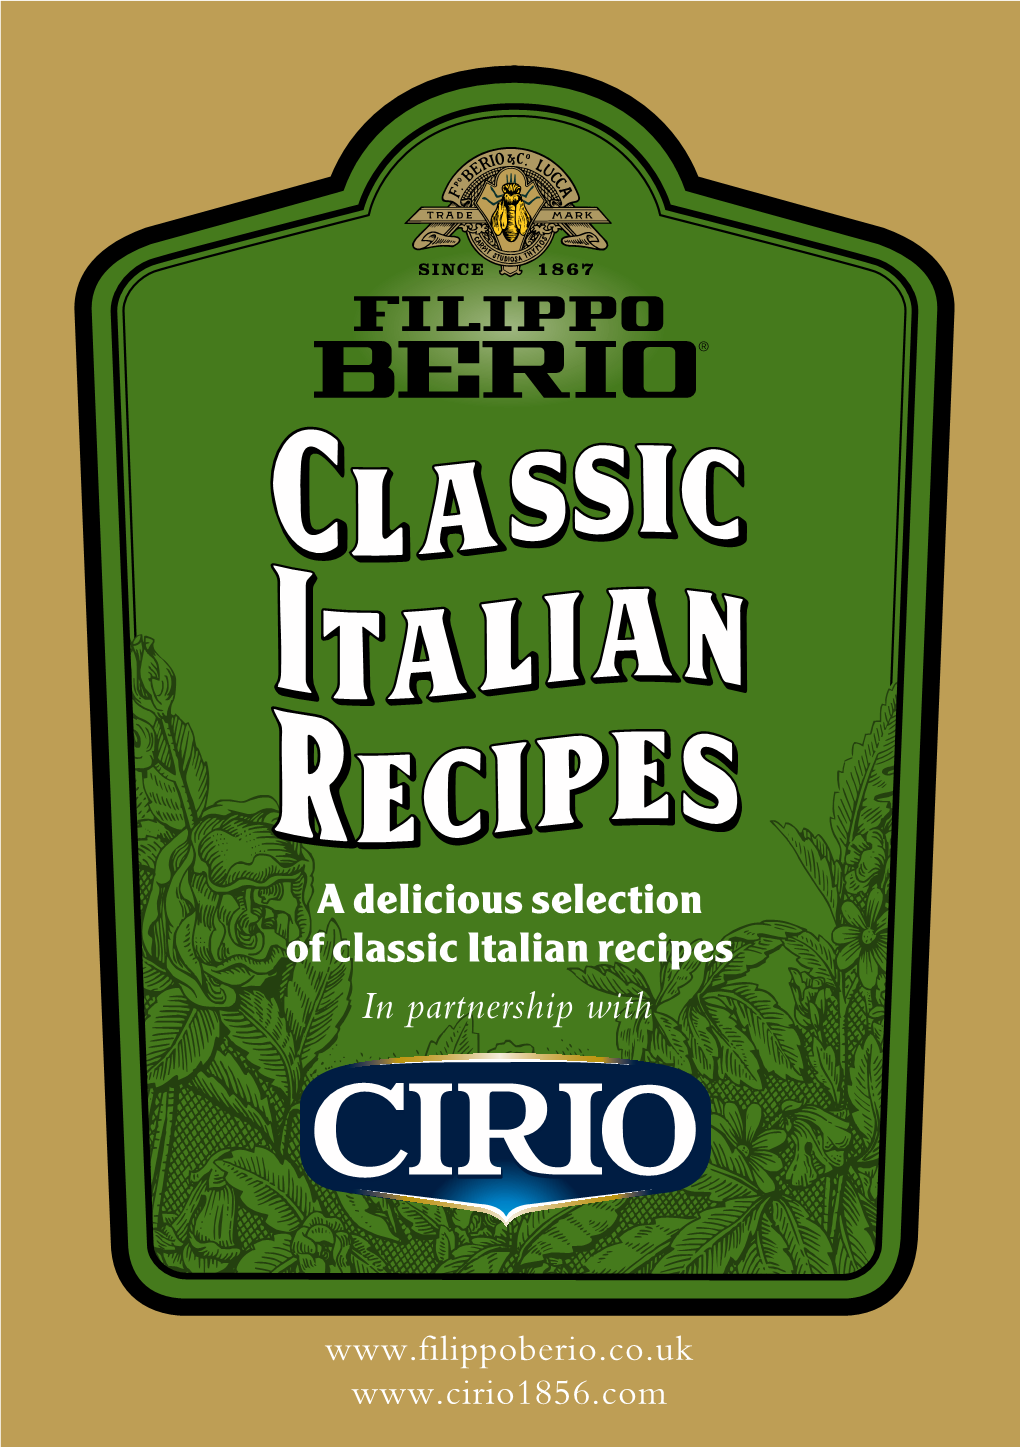 A Delicious Selection of Classic Italian Recipes in Partnership With